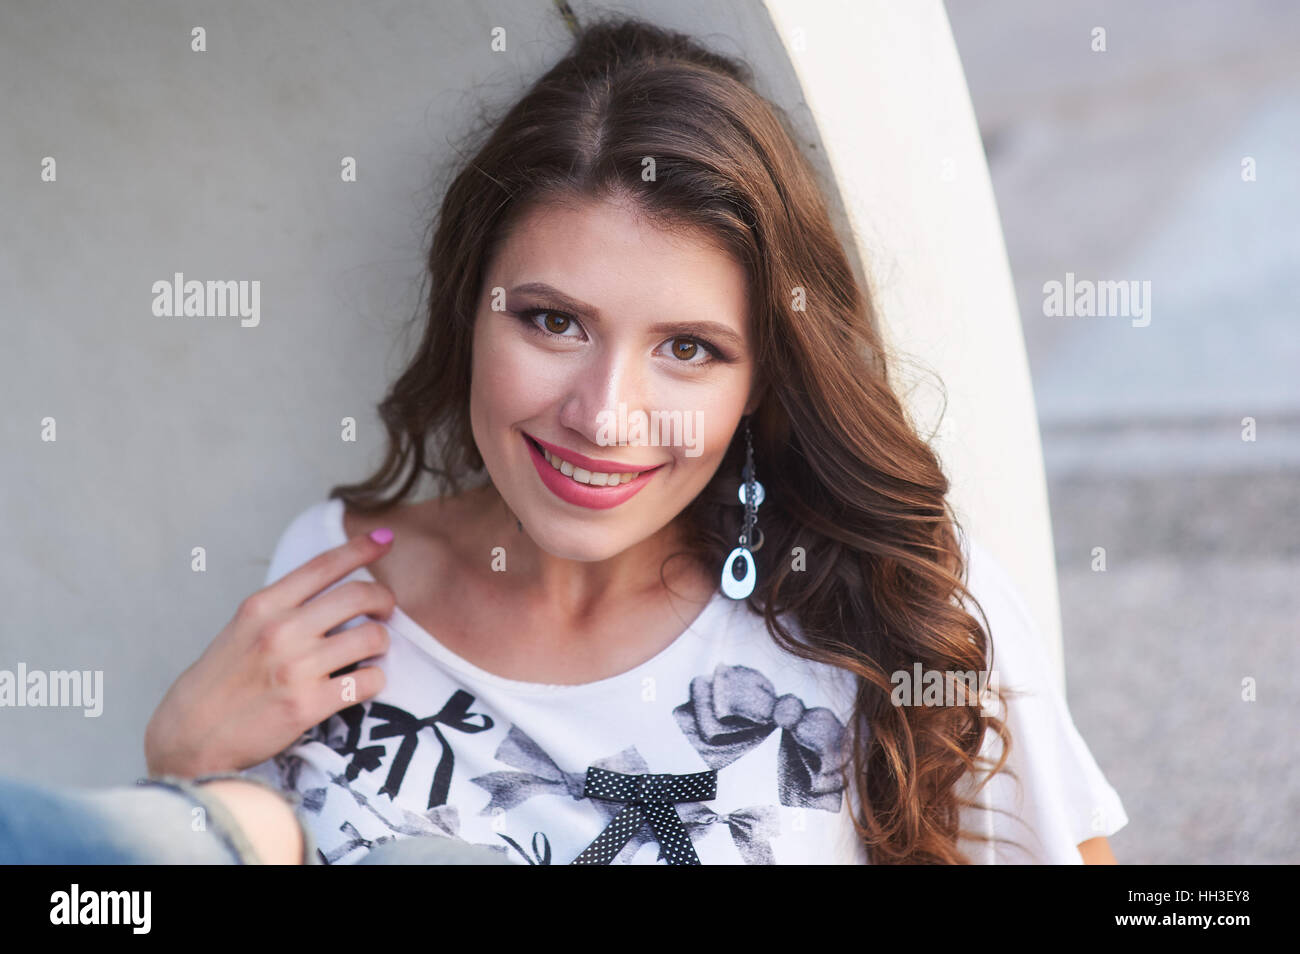 smiling young woman in a shirt with make-up near the wall Stock Photo